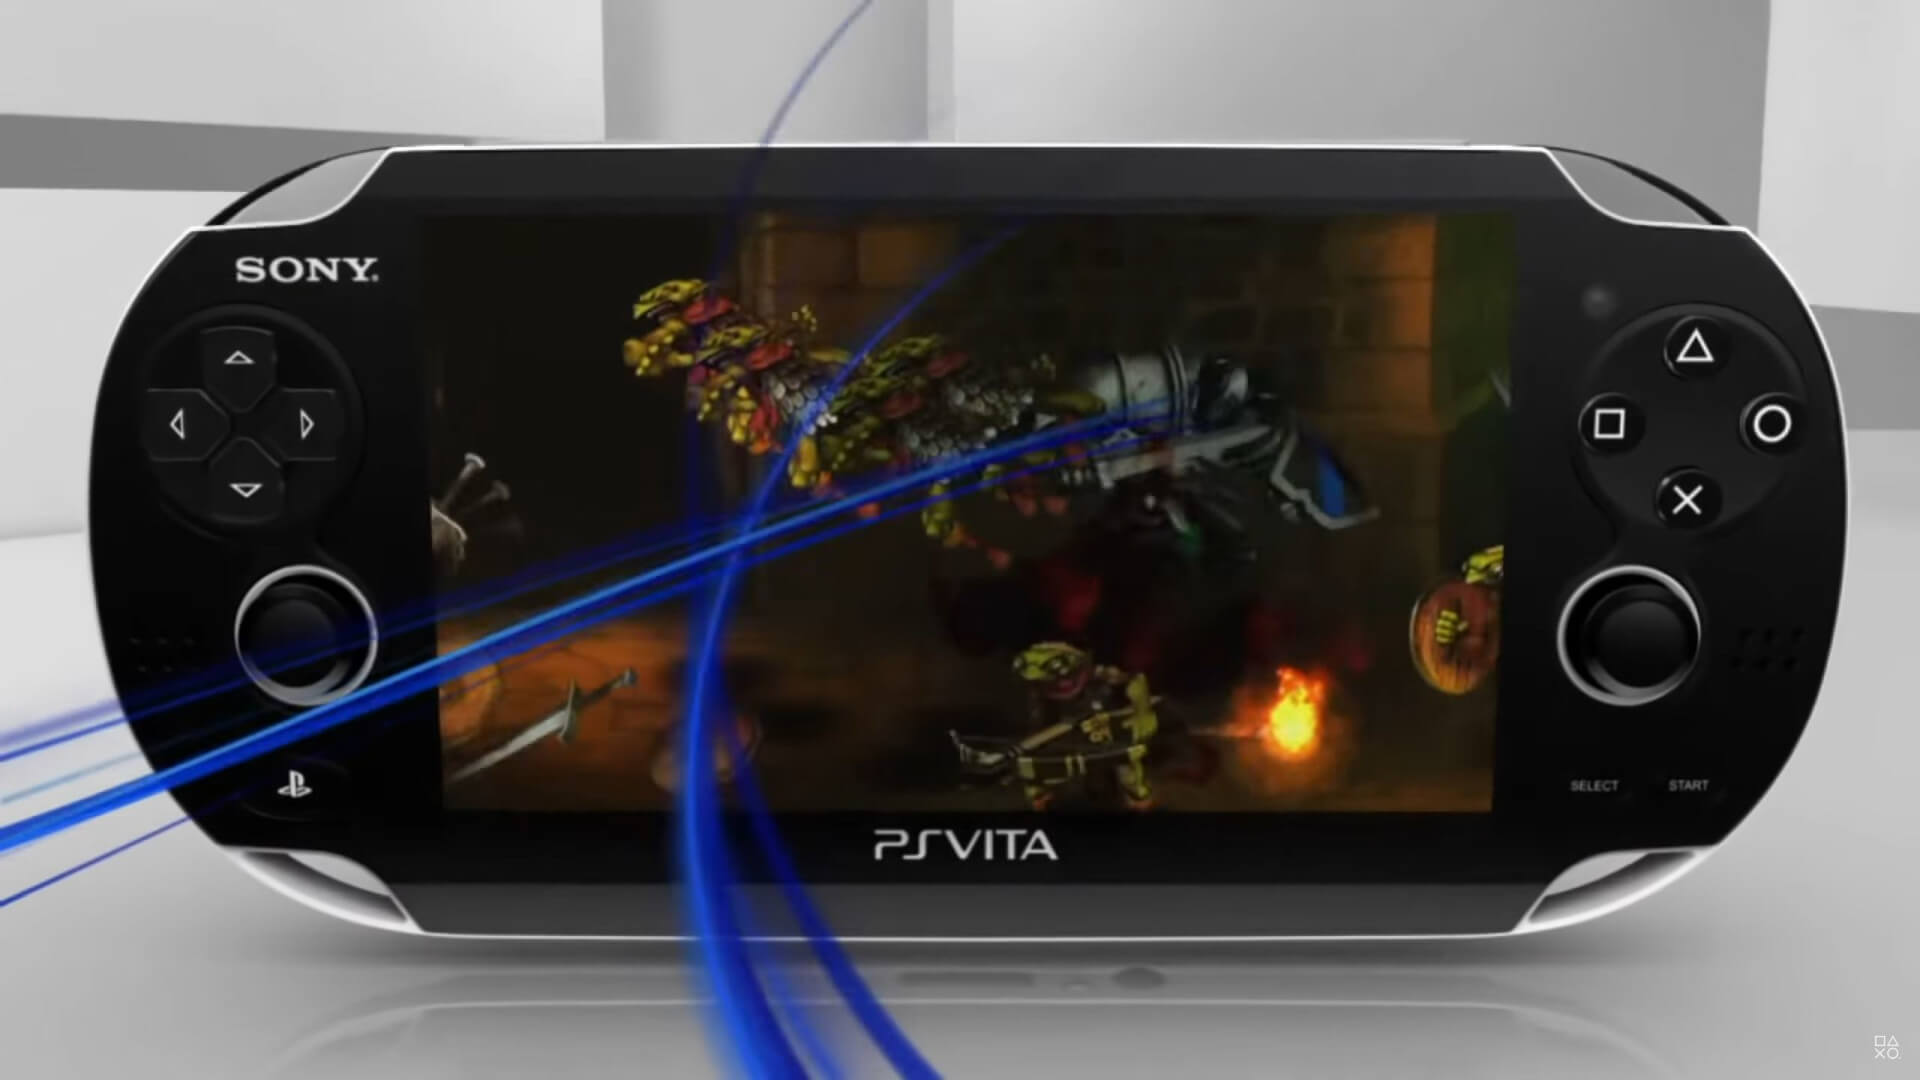 A PlayStation Vita with Dragon's Crown being played on it